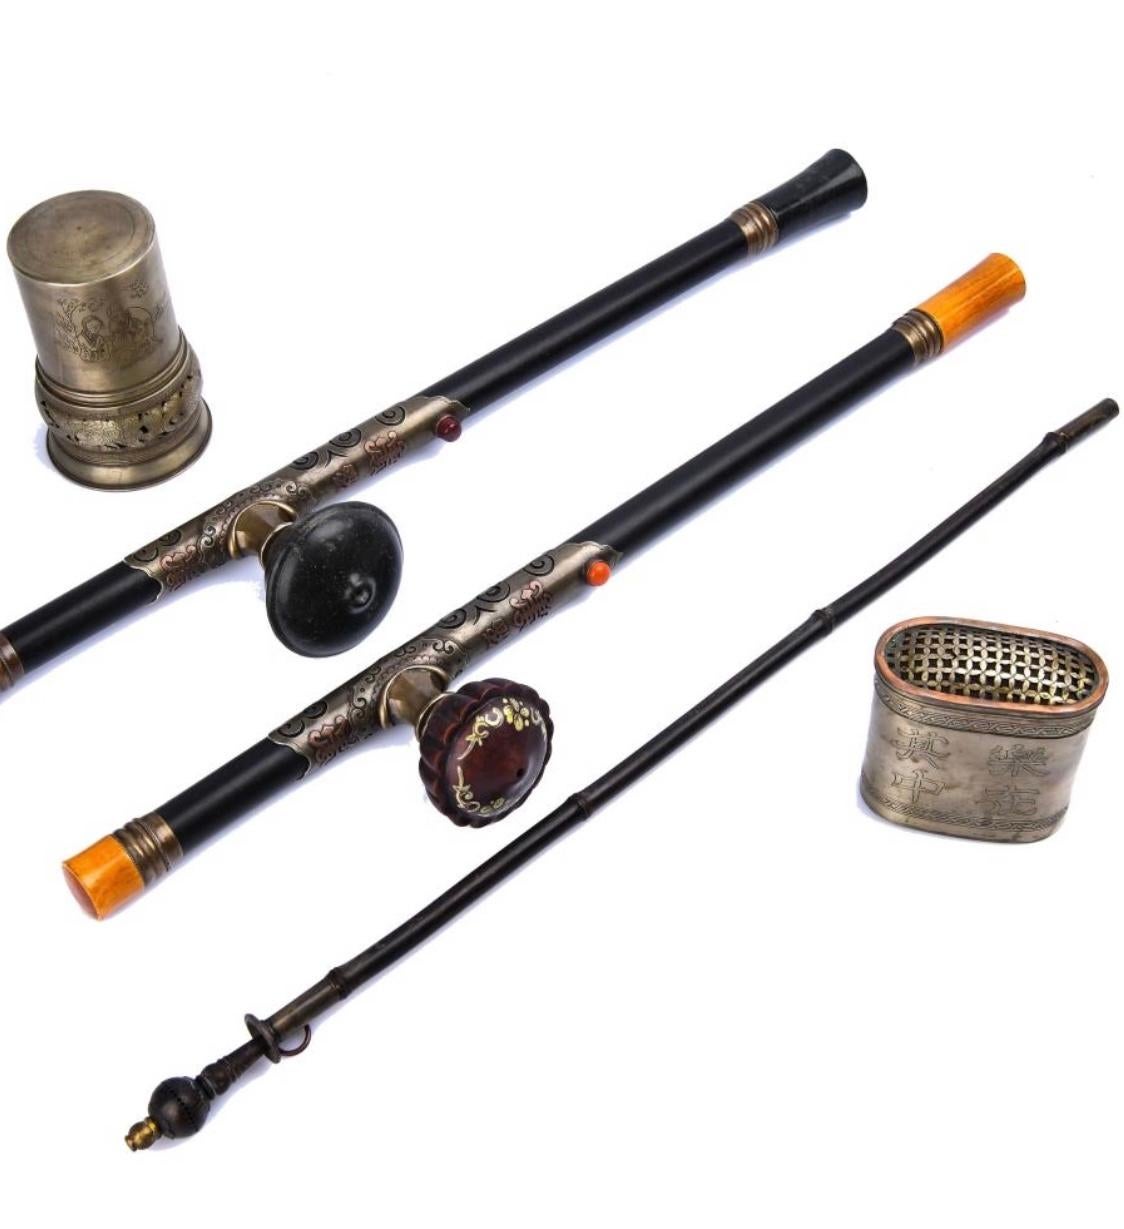 19th century set of five-piece Zitan opium pipes and accessories, two long beautiful Zitan opium pipes, one opium light 3in x 3in x 5in and one opium bo x 3.25in x 3.25in x 1.75in both with Hetai mark.